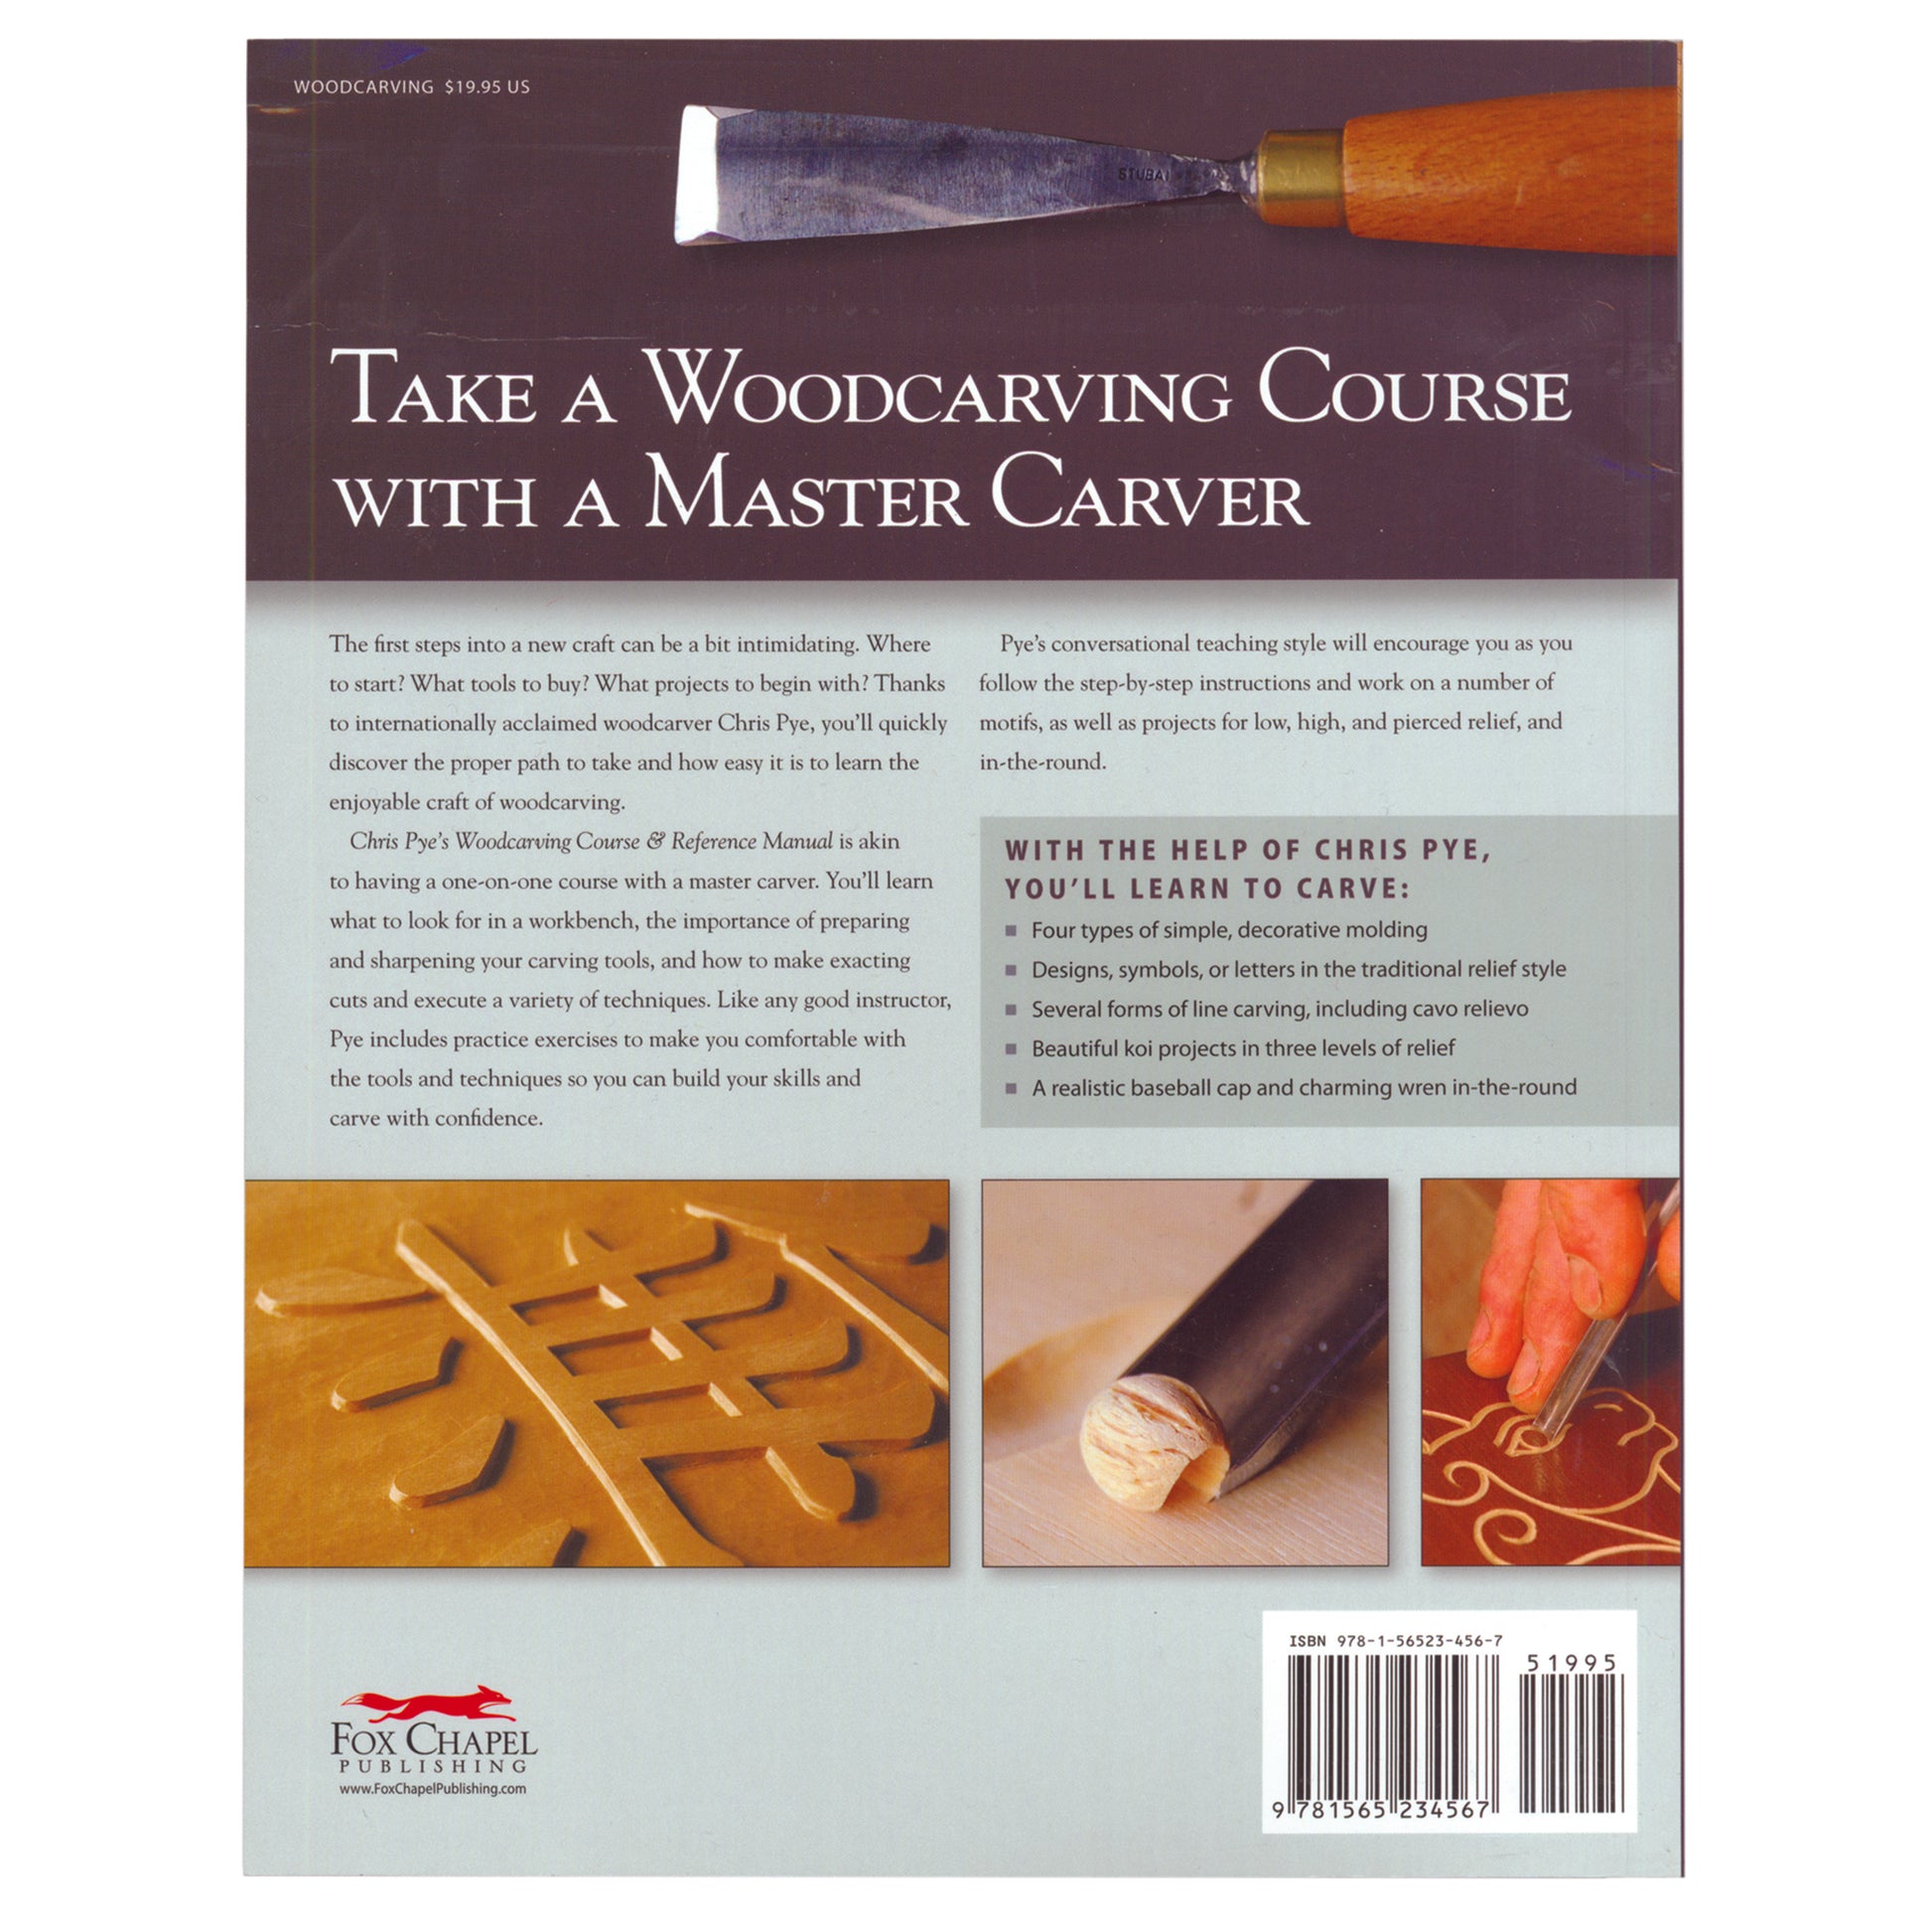 Chris Pye's Woodcarving Course & Reference Manual alt 0